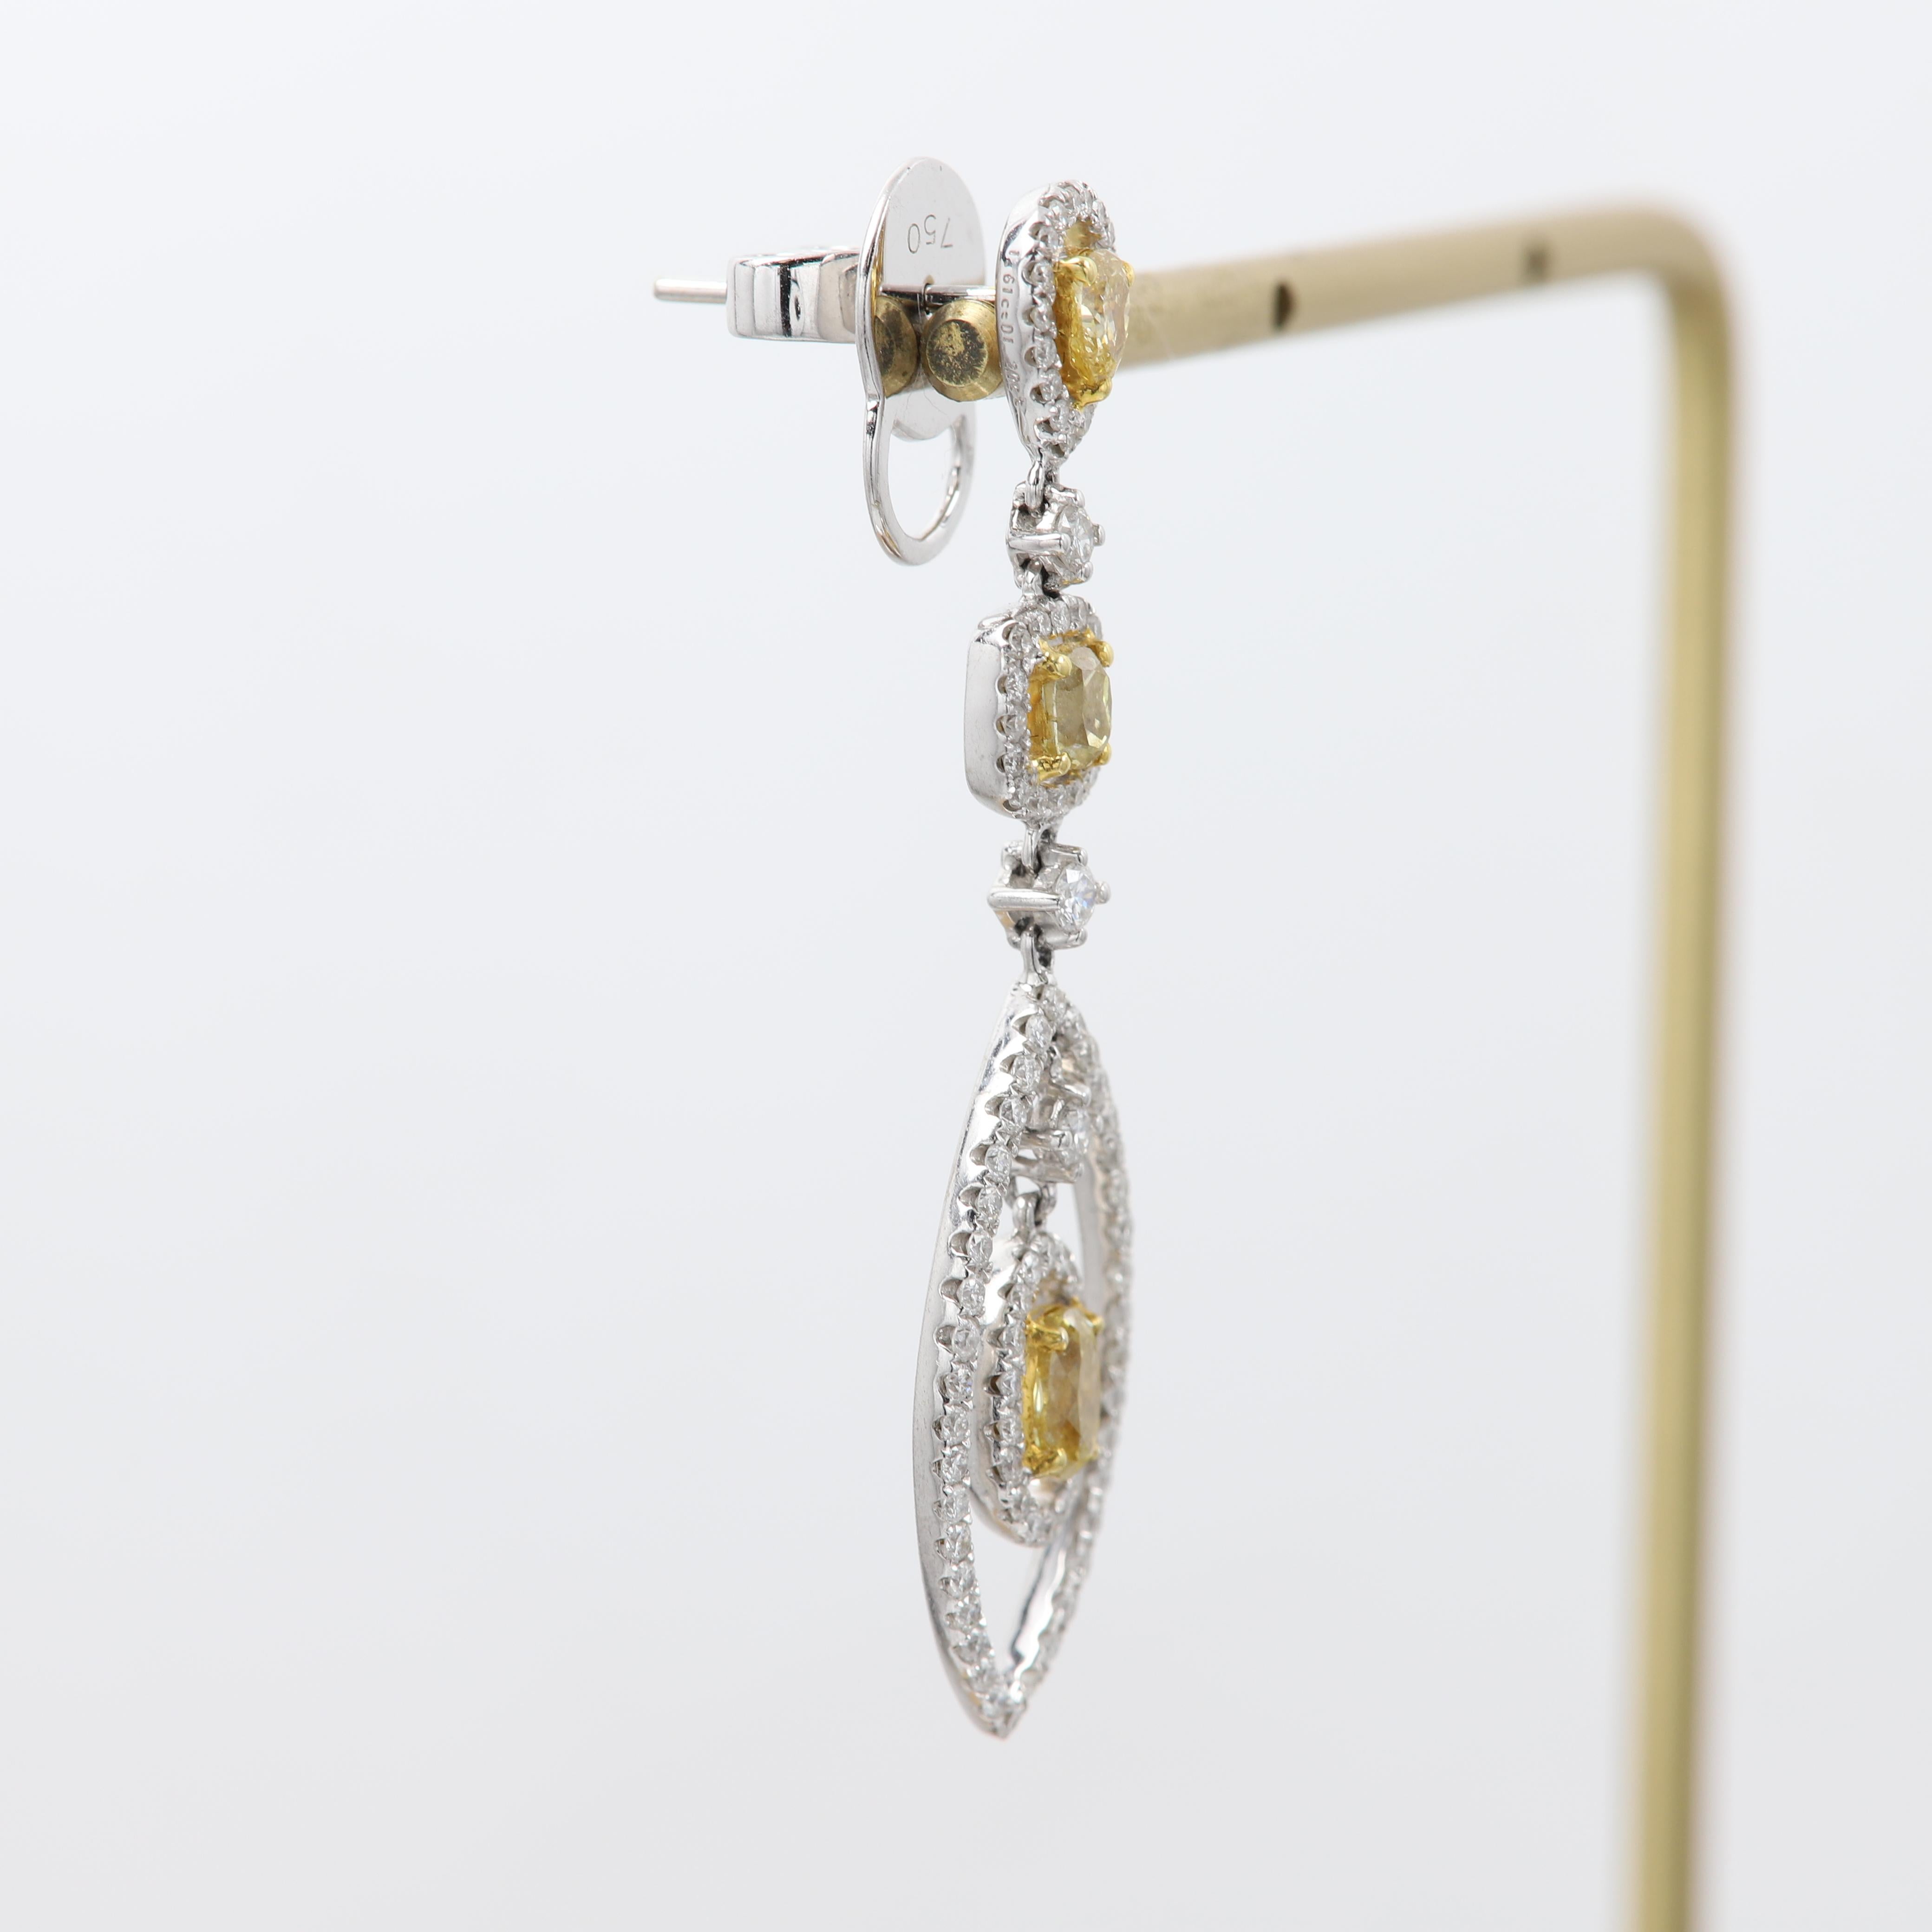 Elegant Chandelier Earrings
Dangling Brilliant Diamonds.

Light Yellow and White Natural Diamonds
18k White Gold Total weight  8.8 grams

Total White Diamonds 1.20 carat. 
Total Light Yellow Diamonds 1.61 carat.

All Diamonds are Natural.
Fancy Gift